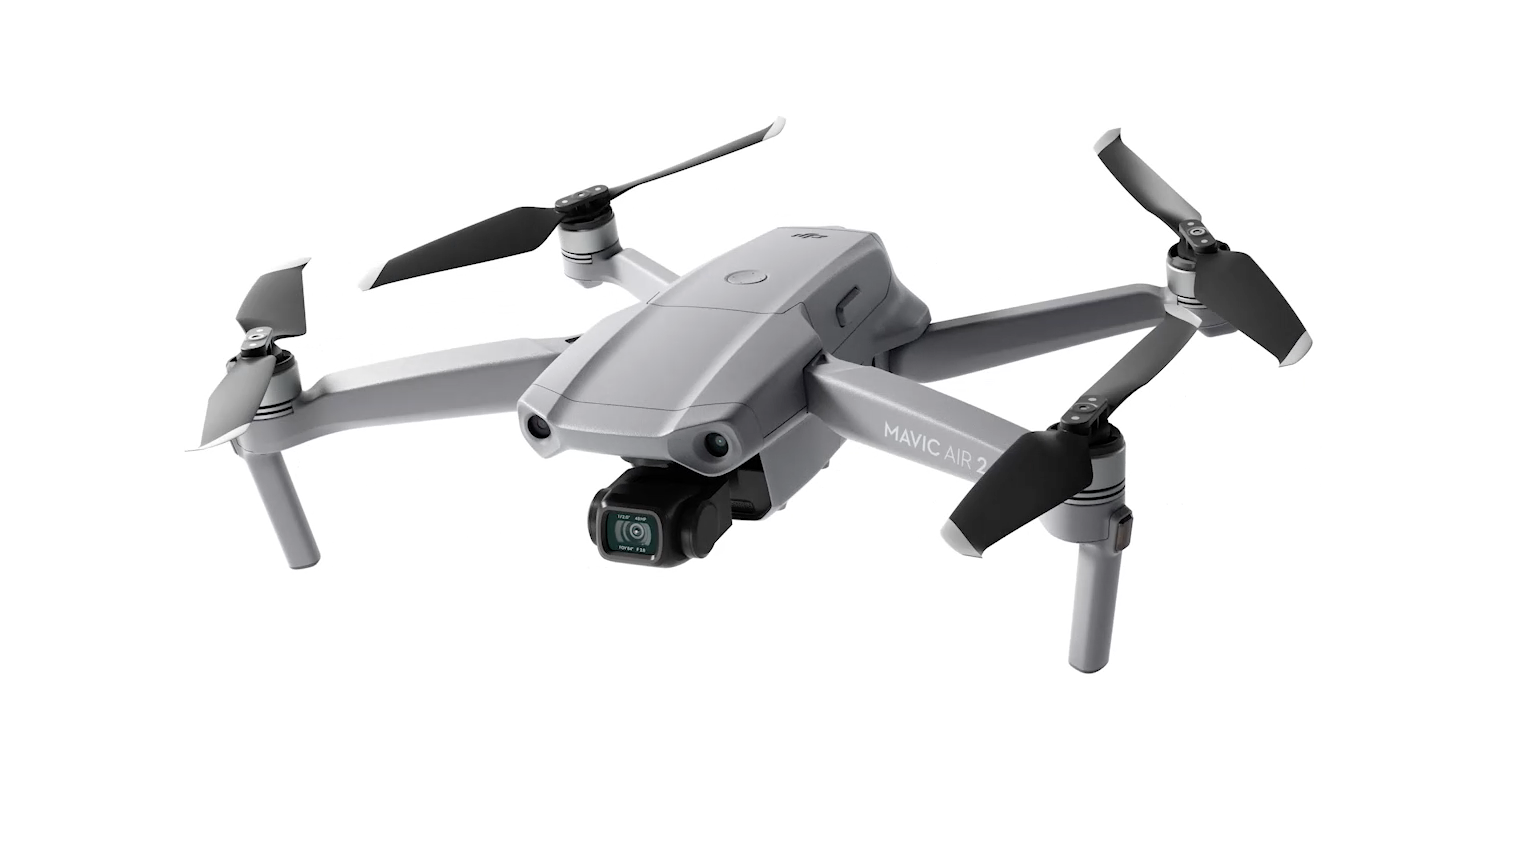 DJI launches Mavic Air drone: Price, specs more of India